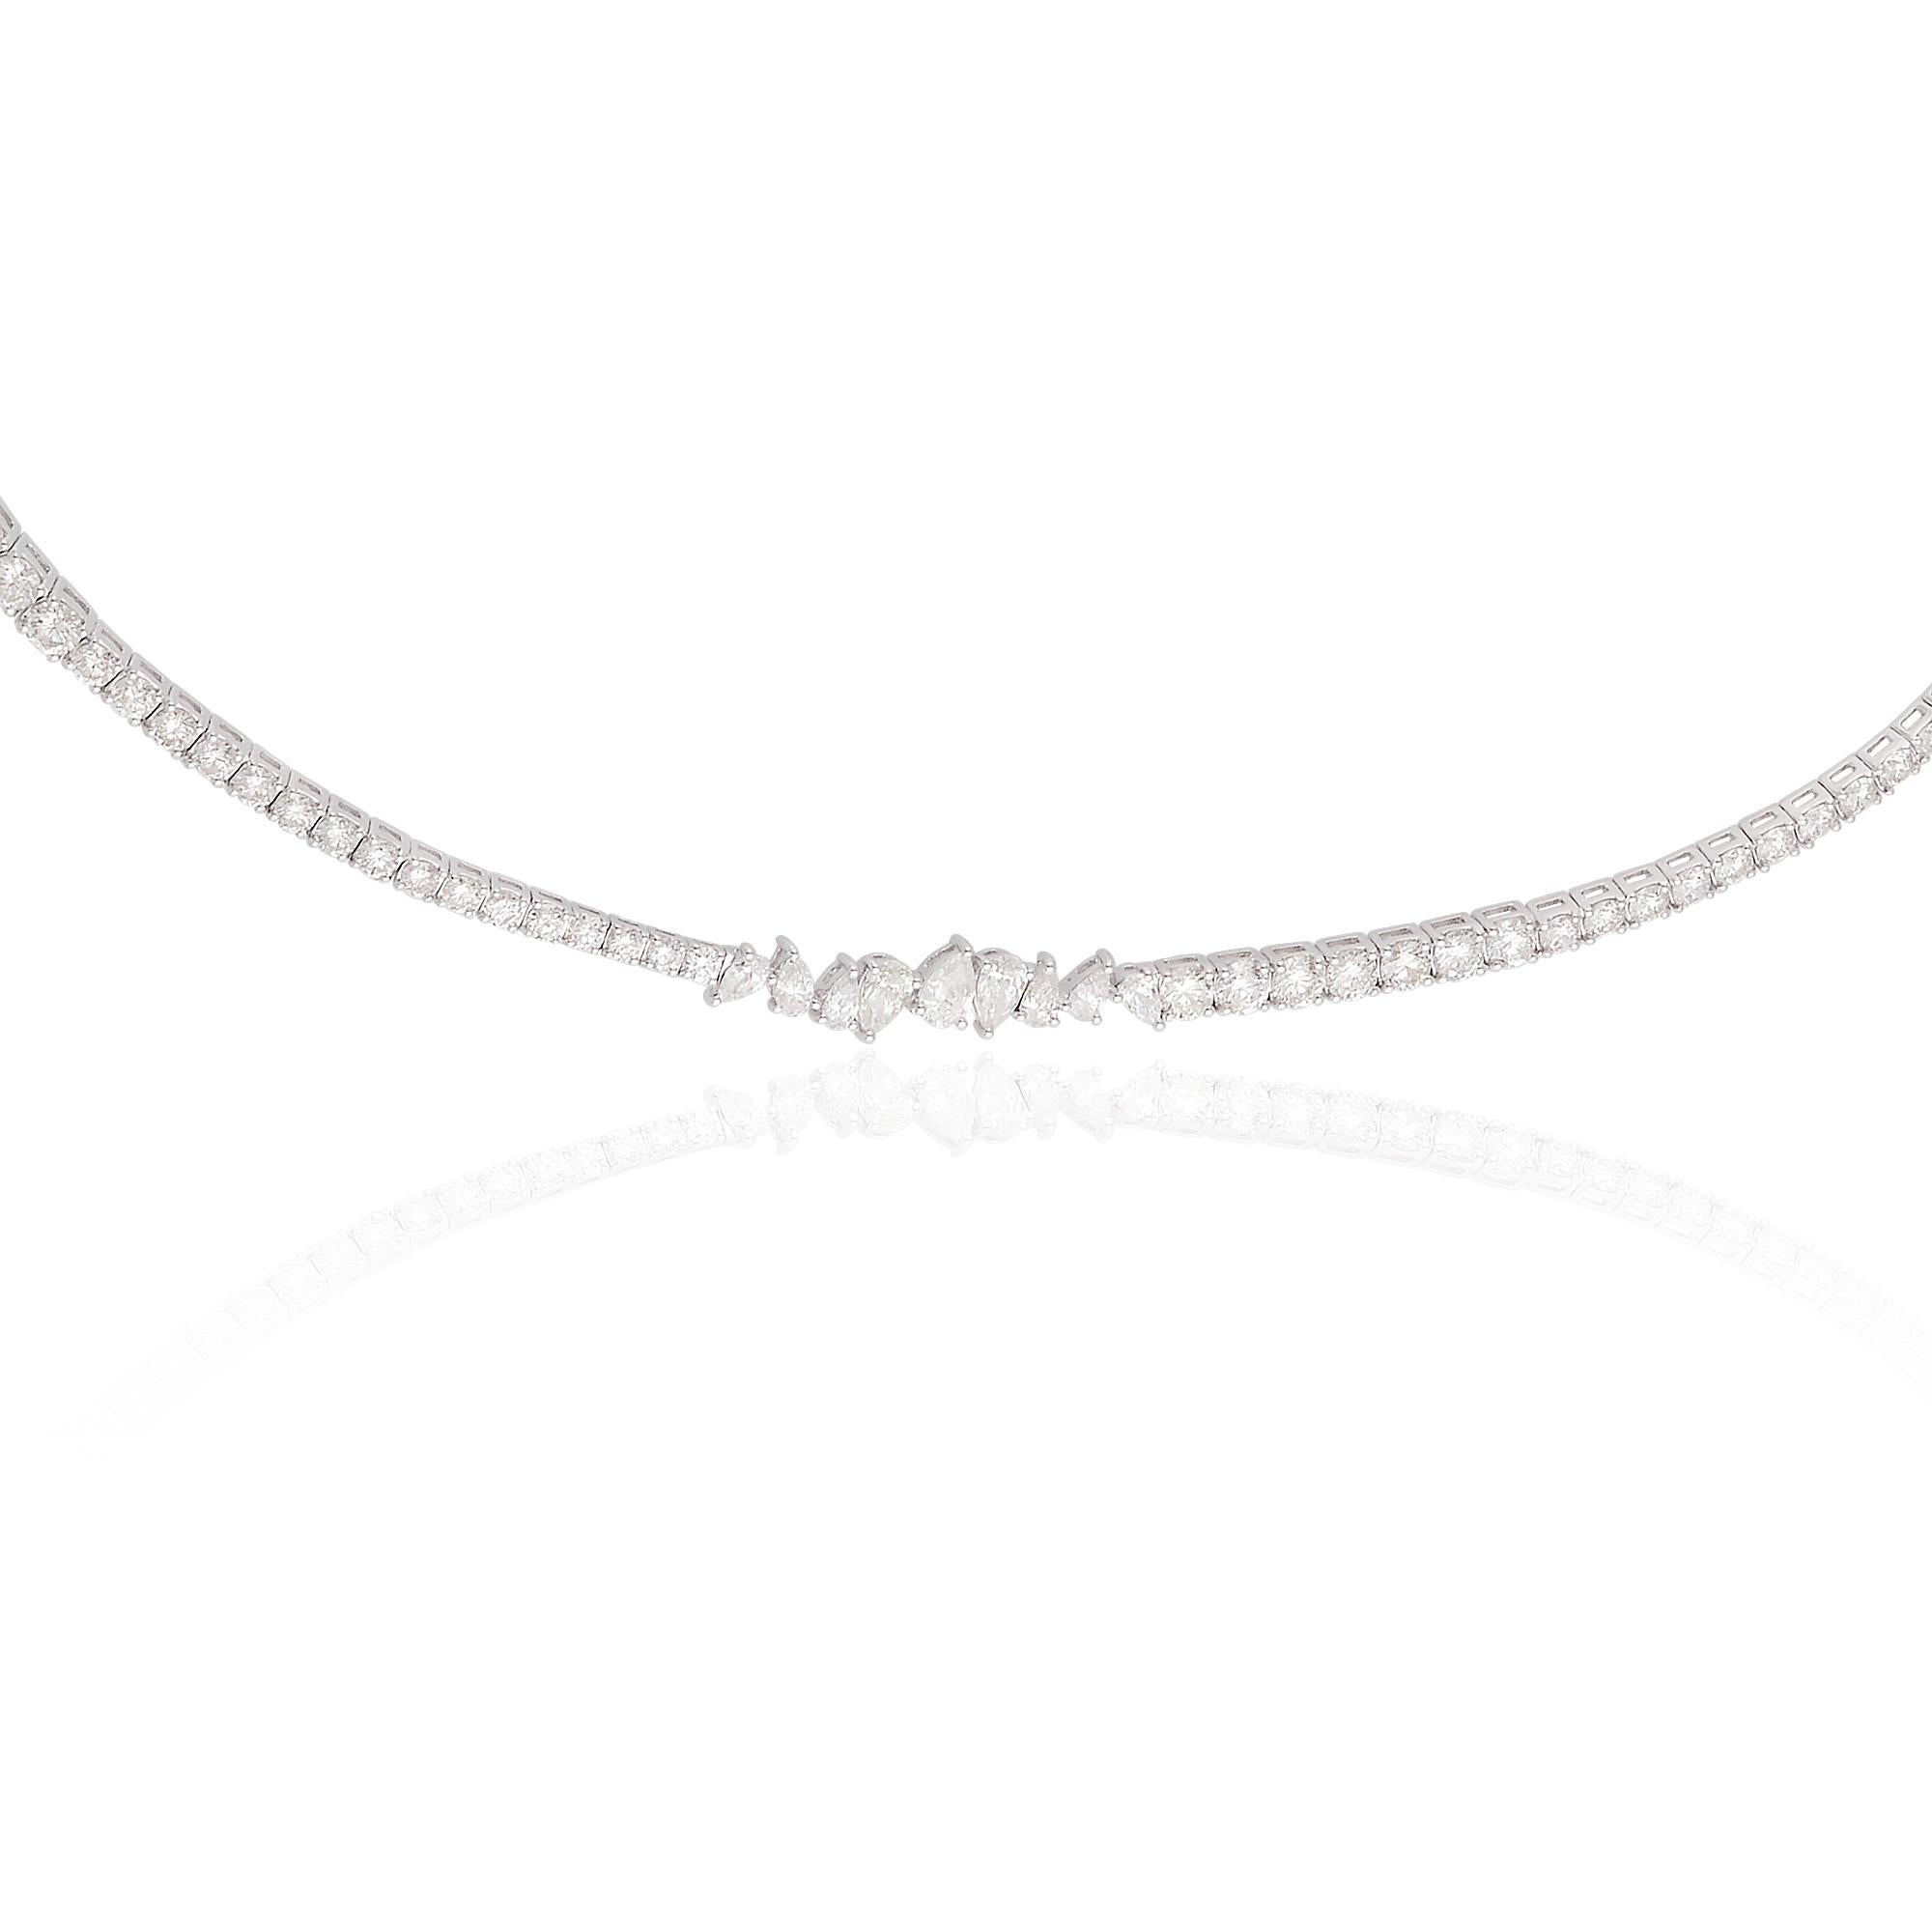 This diamond choker necklace is a true work of art, showcasing the timeless beauty and elegance of diamonds. Whether worn on its own or layered with other necklaces, it is guaranteed to make a lasting impression. Its versatility and timeless appeal